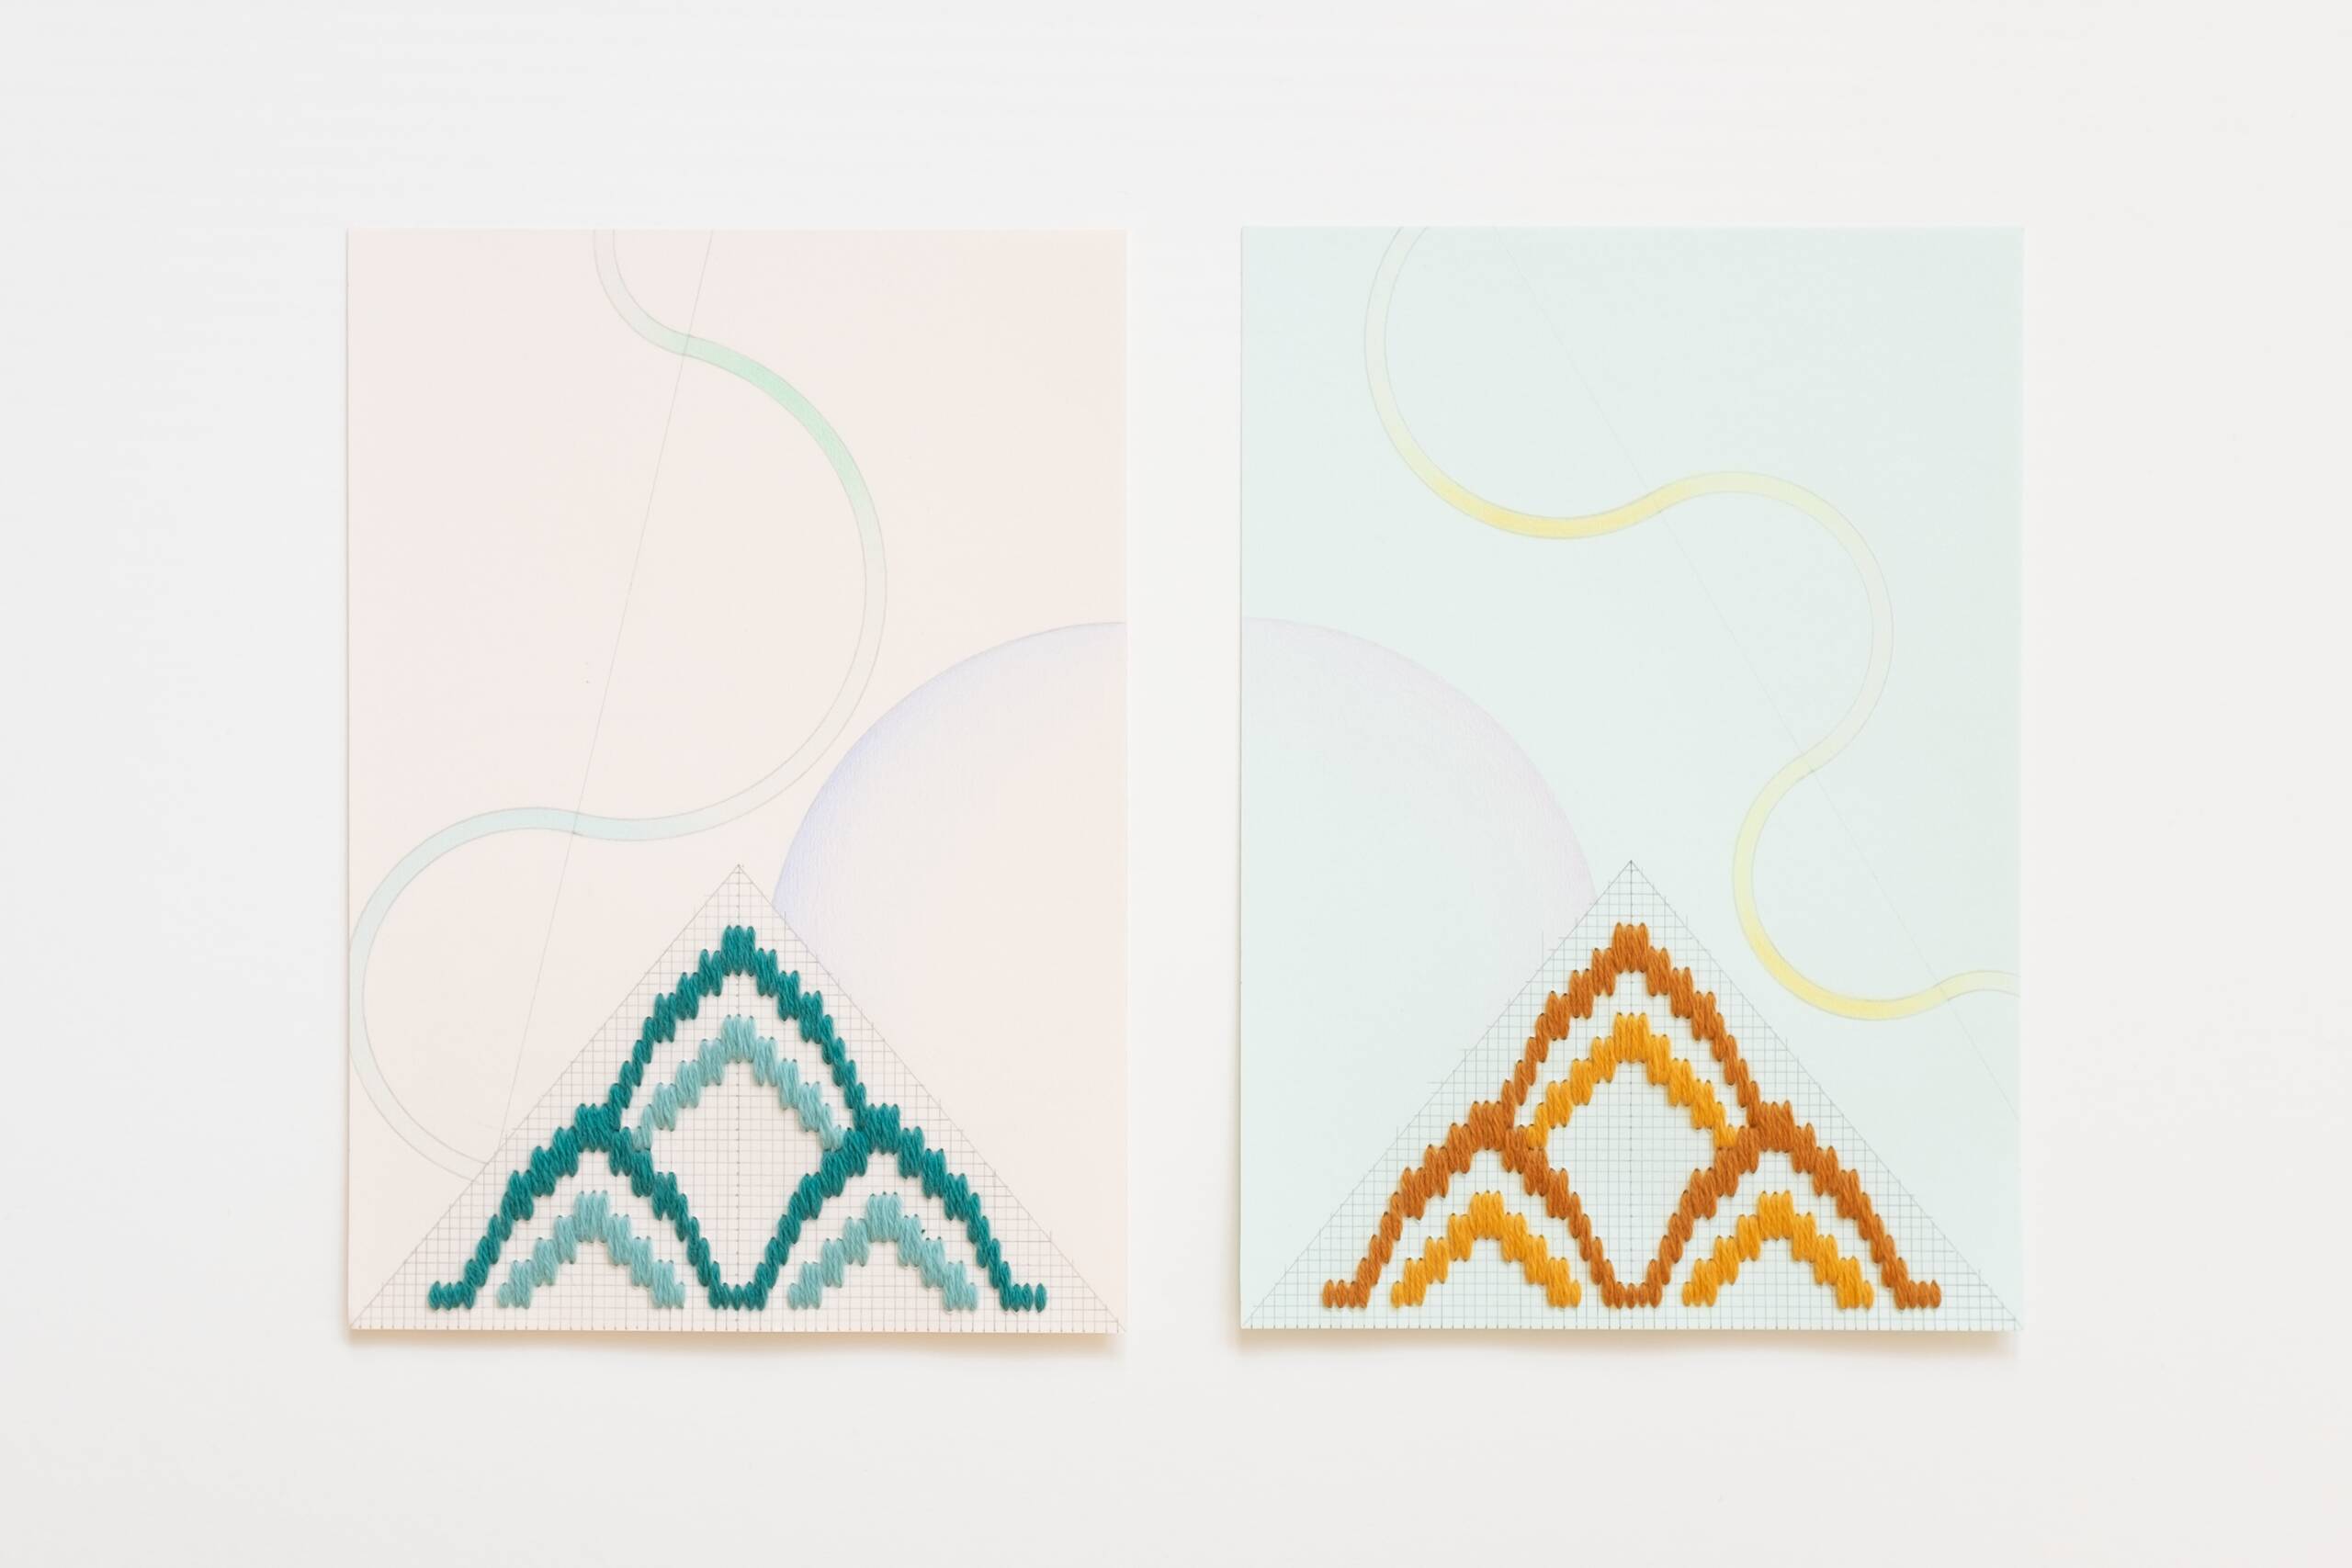 Bargello triangles [teal on peach and gold on green] (diptych), Hand-embroidered wool yarn, pencil and colored pencil on 170 gsm paper, 2021